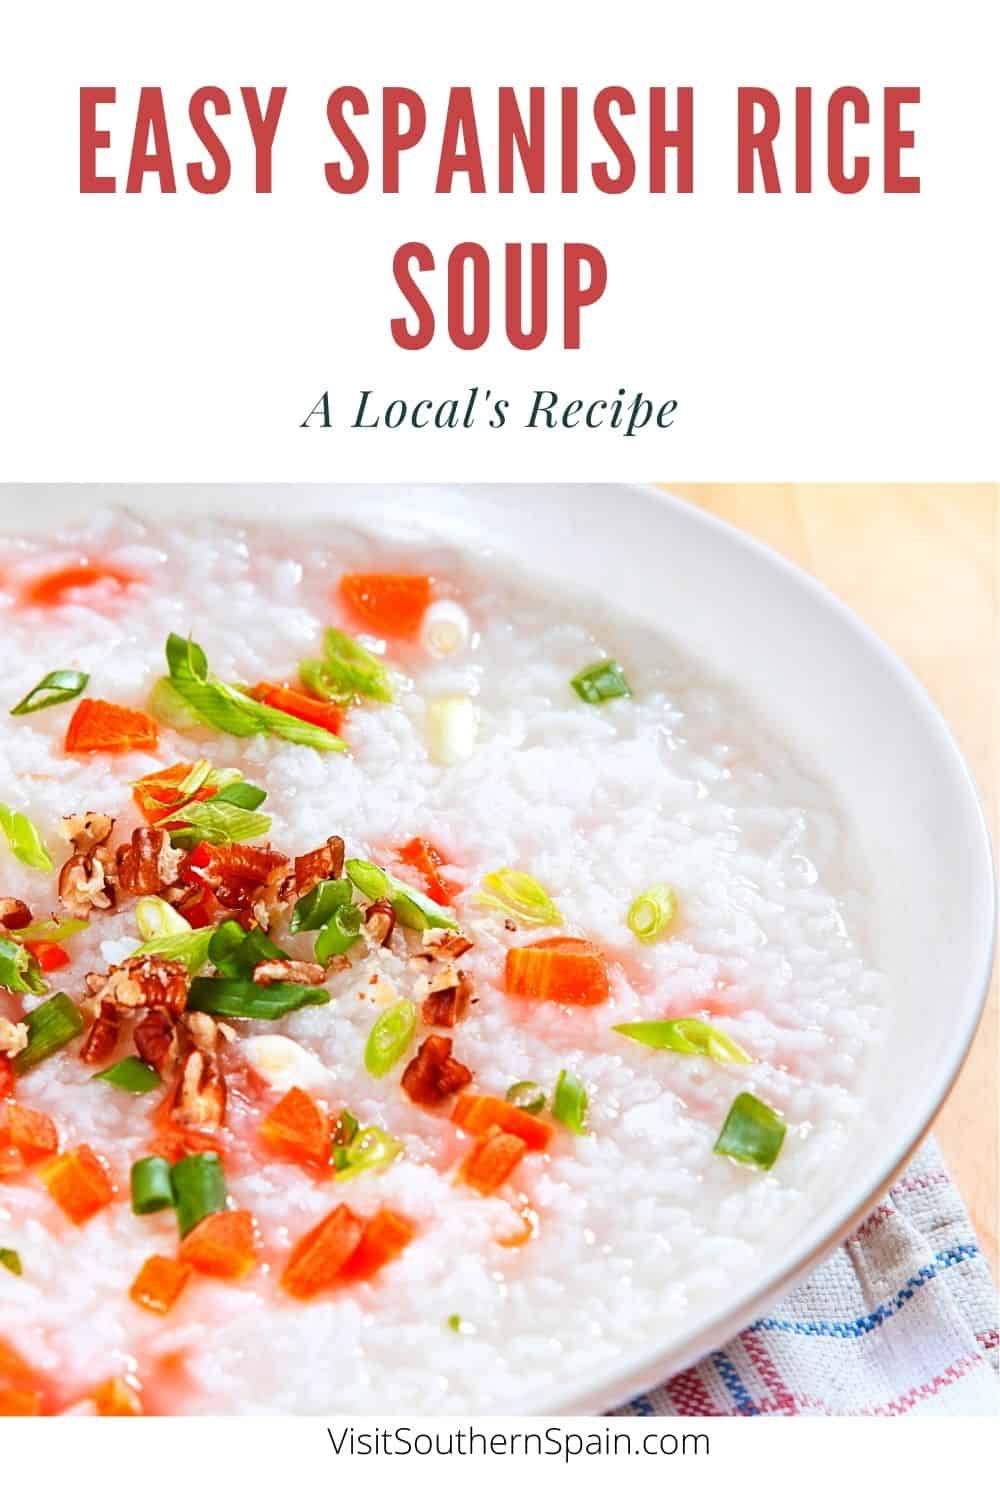 Easy Spanish Rice Soup Recipe - Visit Southern Spain